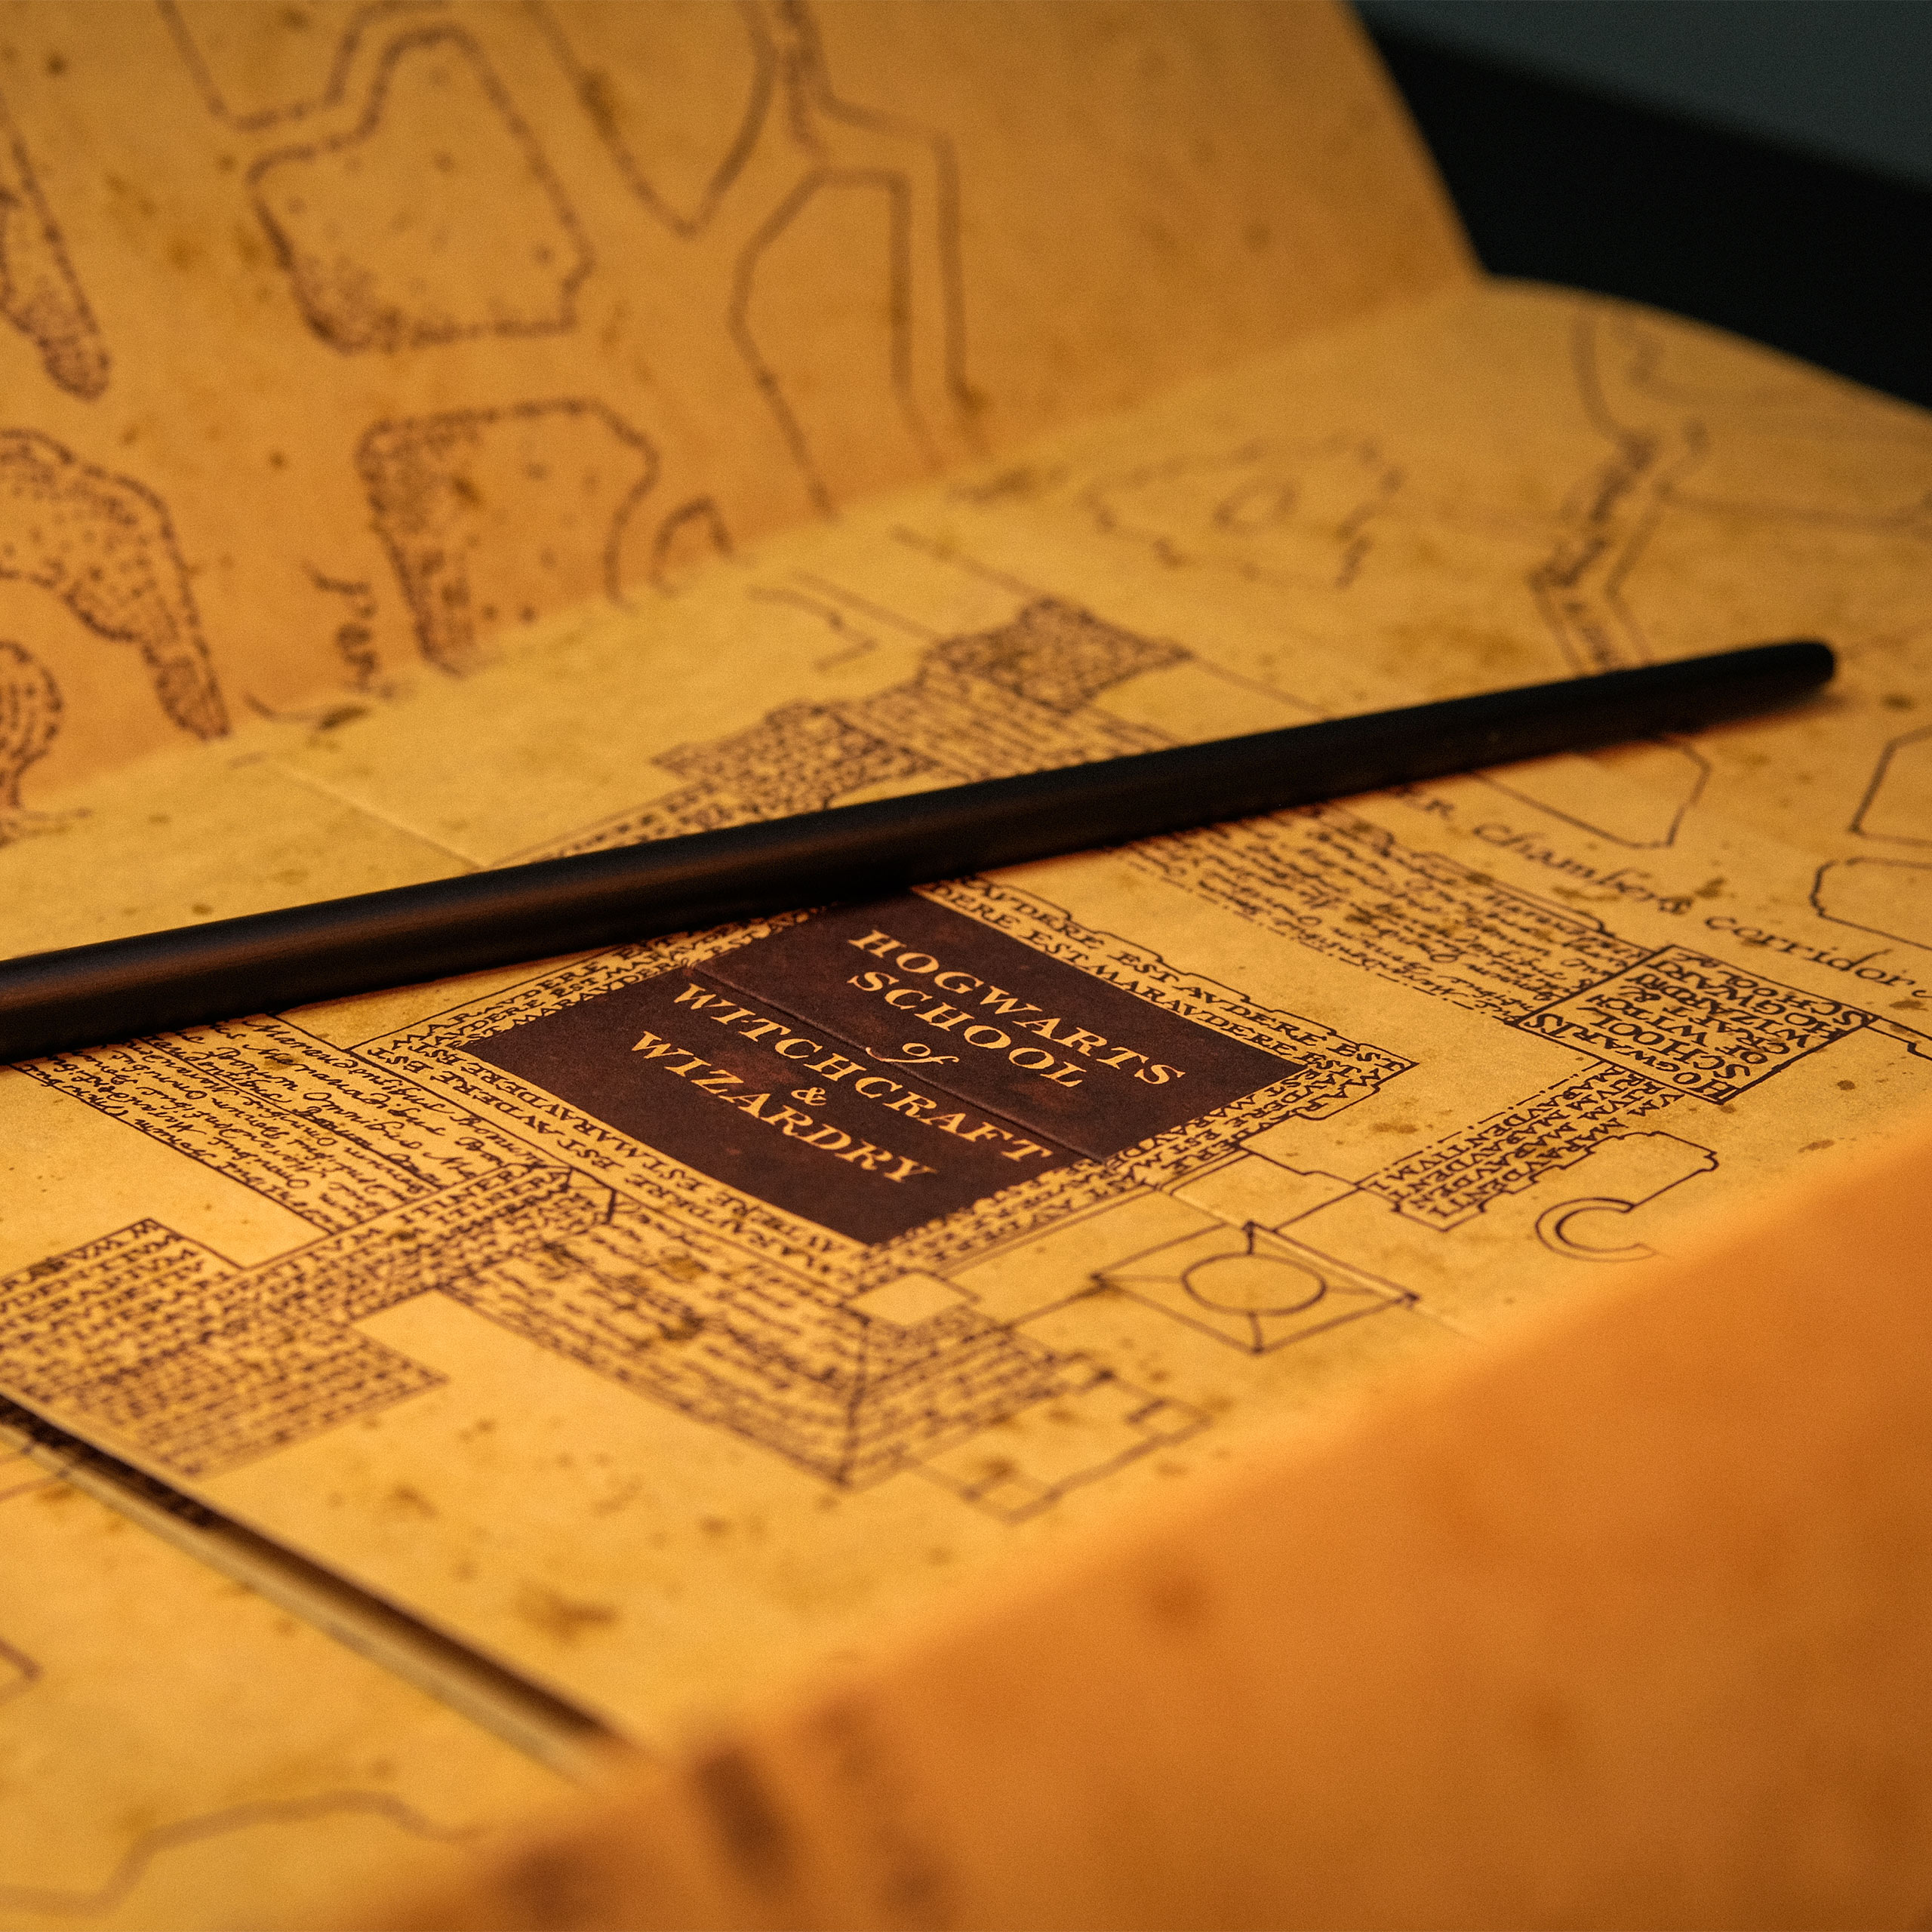 The Marauder's Map including display